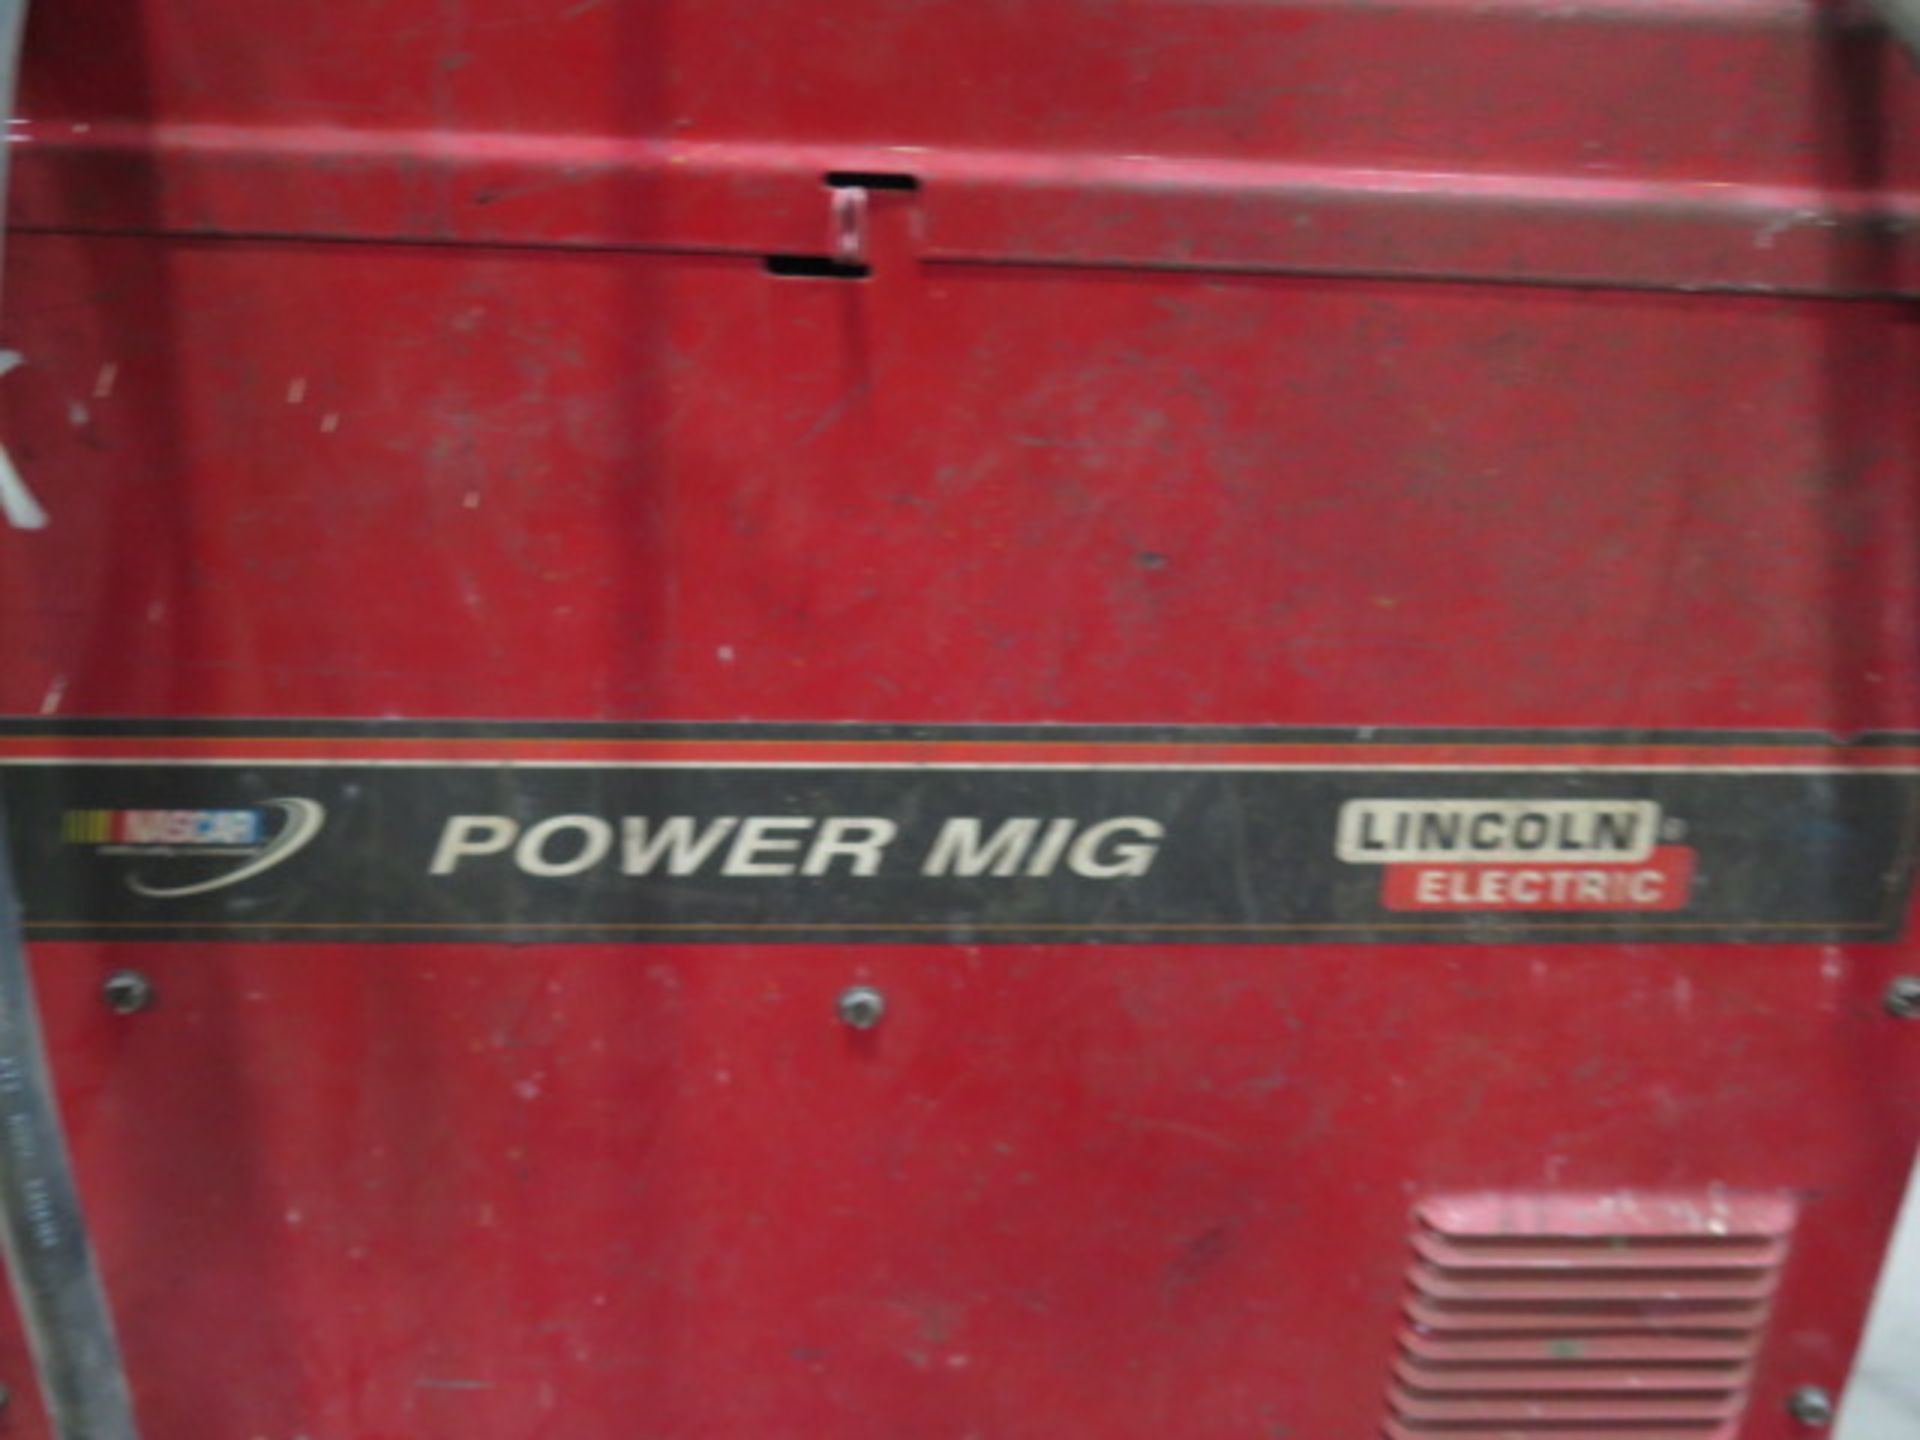 Lincoln Power MIG 255 MIG Welding Power Source s/n U1040504480 (SOLD AS-IS - NO WATRRANTY) - Image 8 of 8